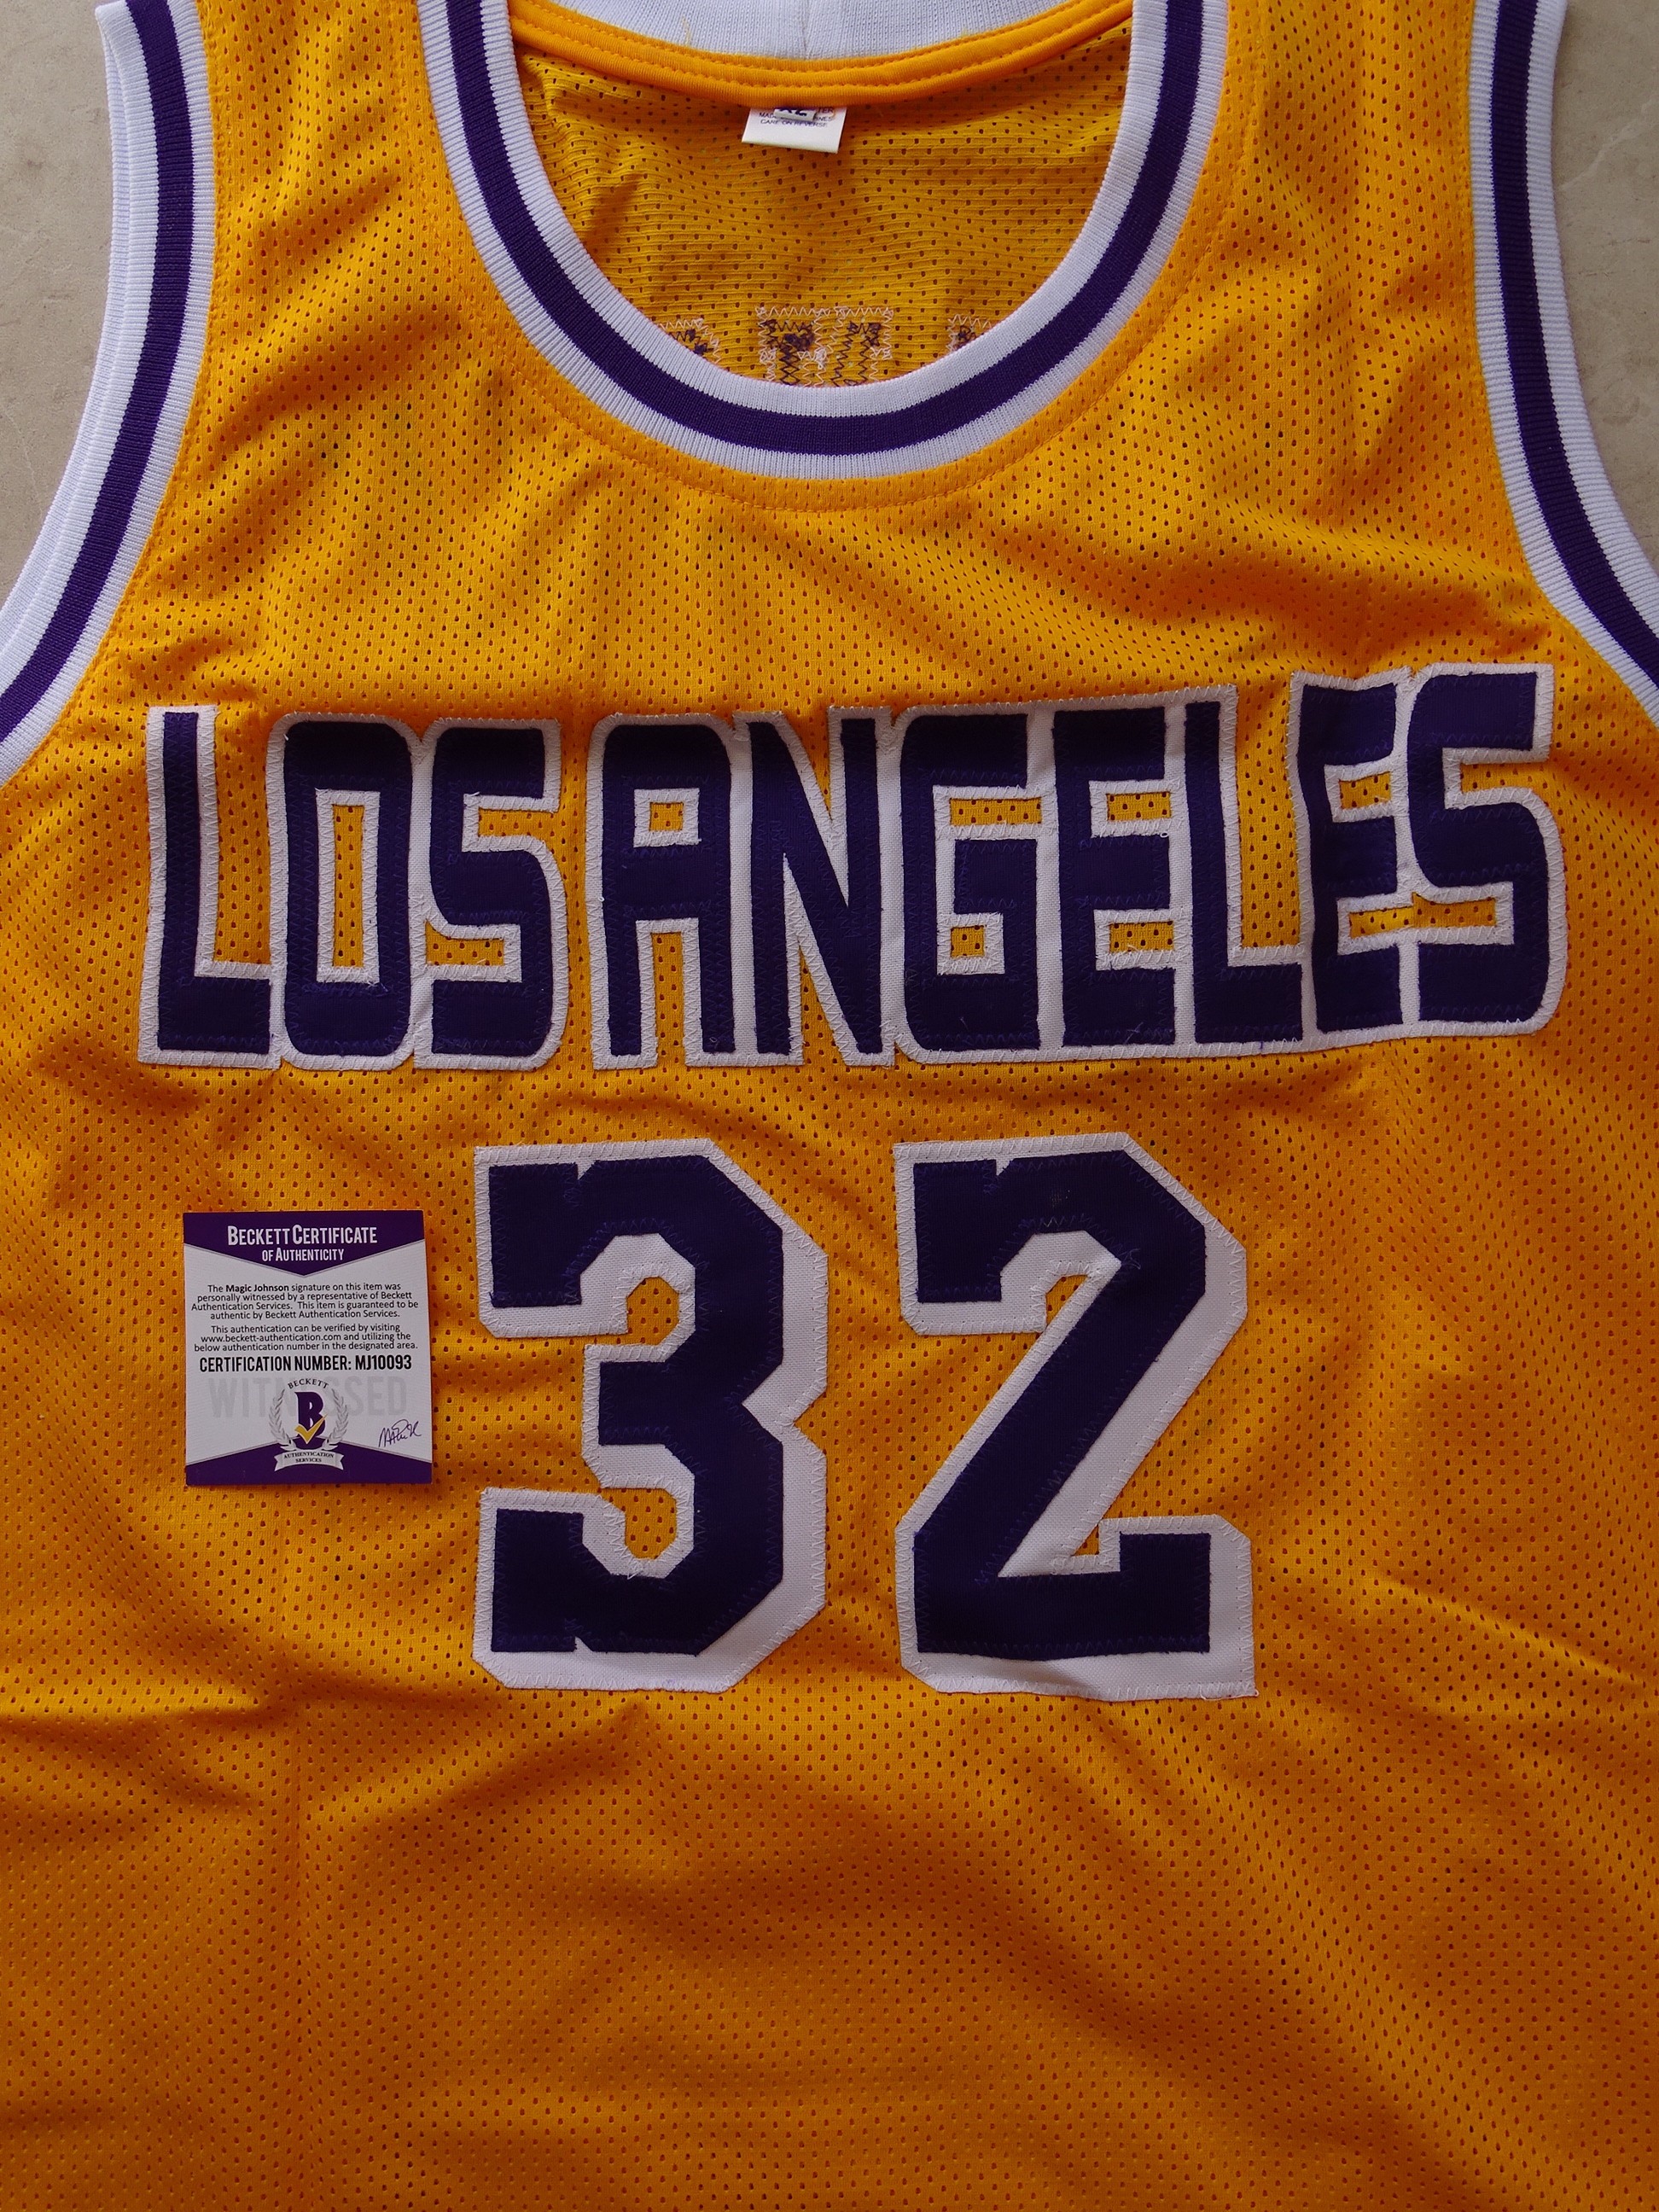 Magic Johnson's Official LA Lakers Jersey - Signed by Johnson and